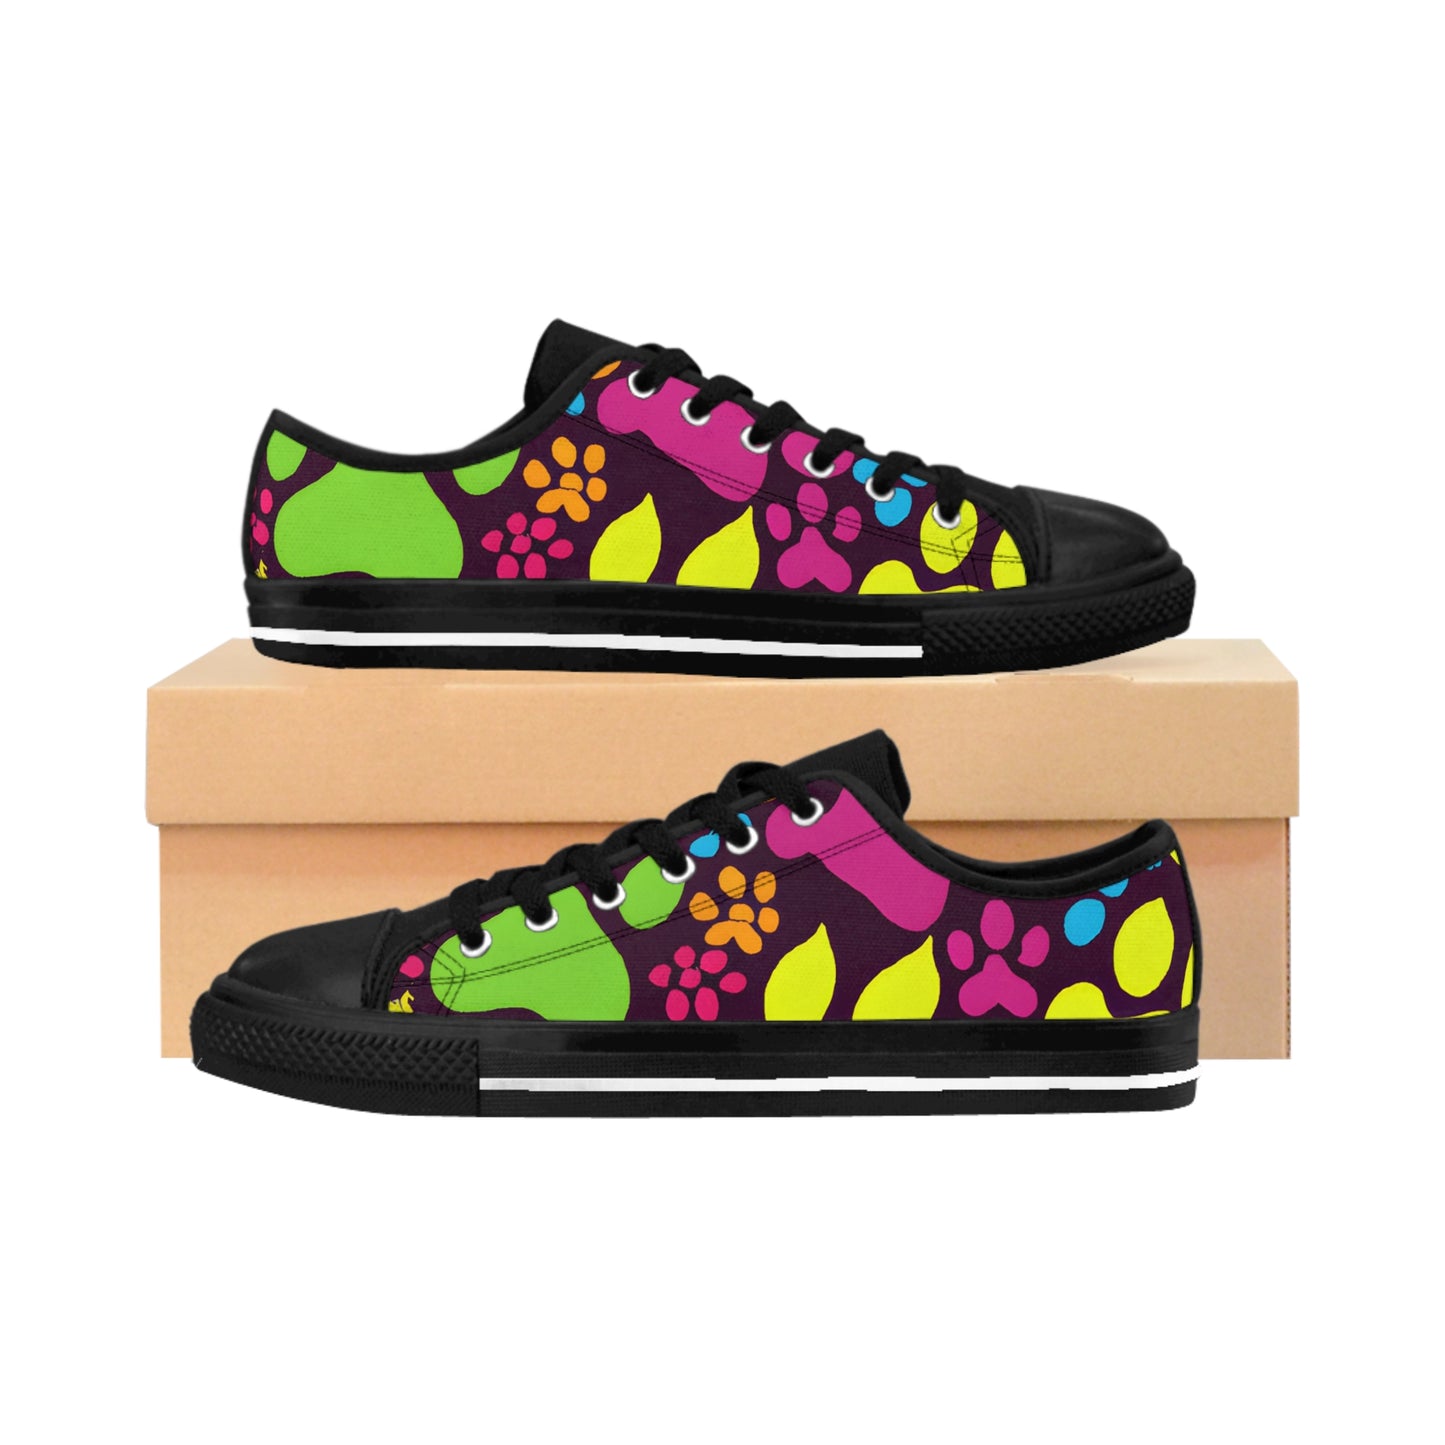 Jacques Gaultier - Paw Print - Low-Top